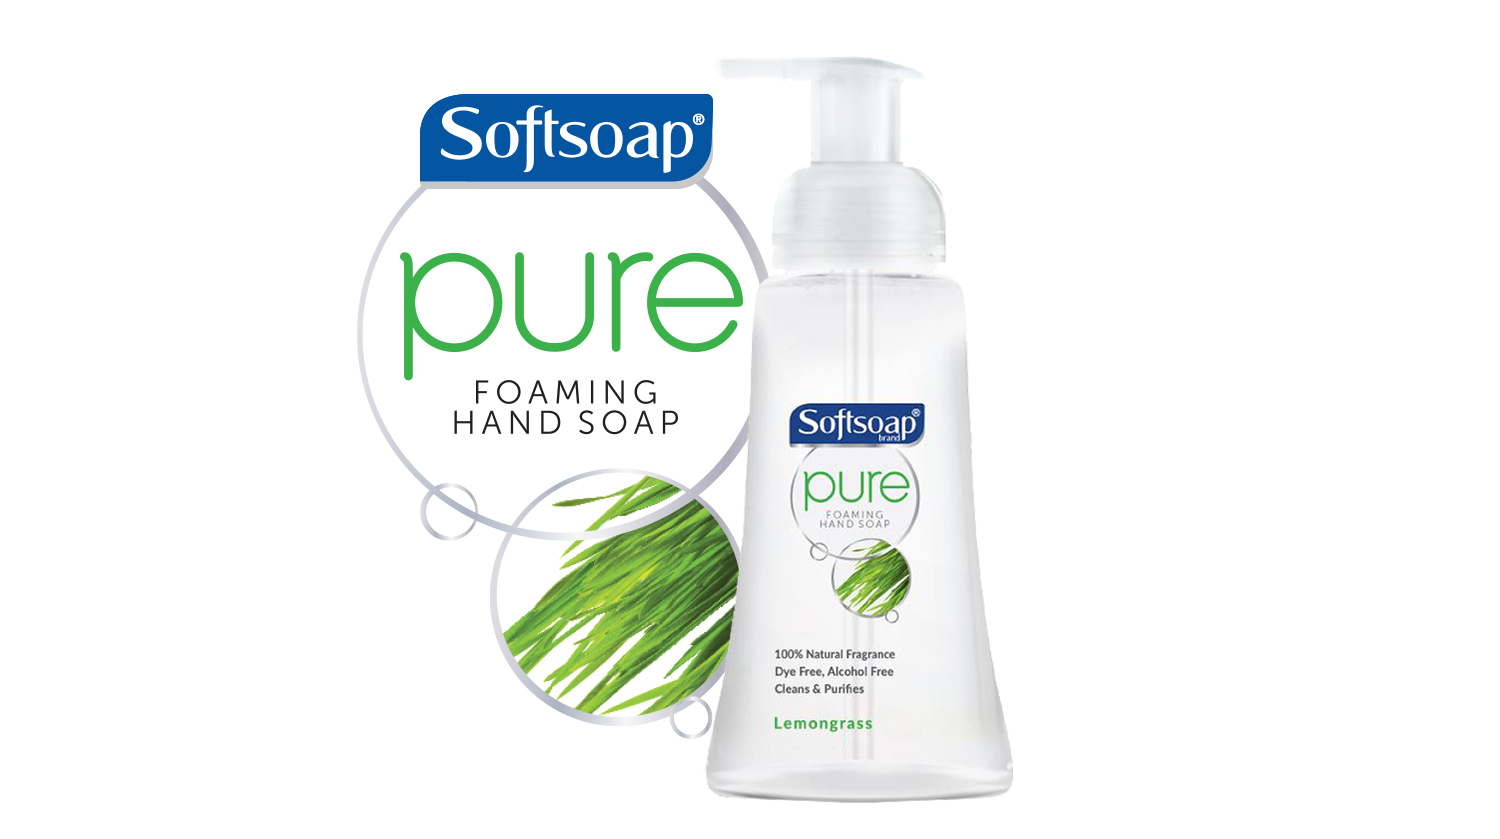 Softsoap Coupons